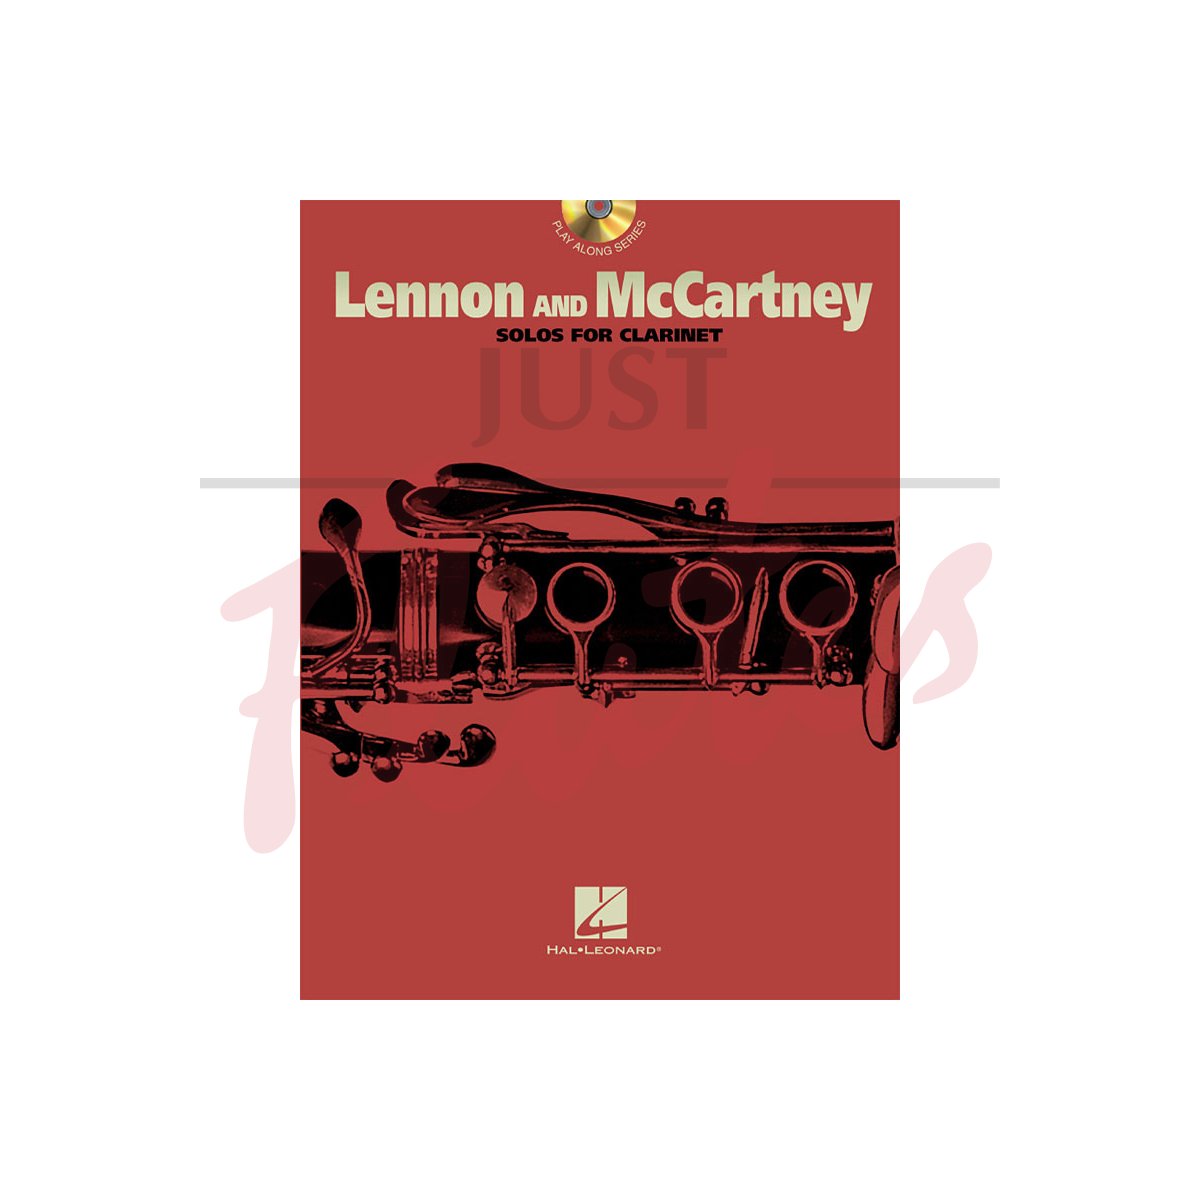 Lennon and McCartney Solos for Clarinet